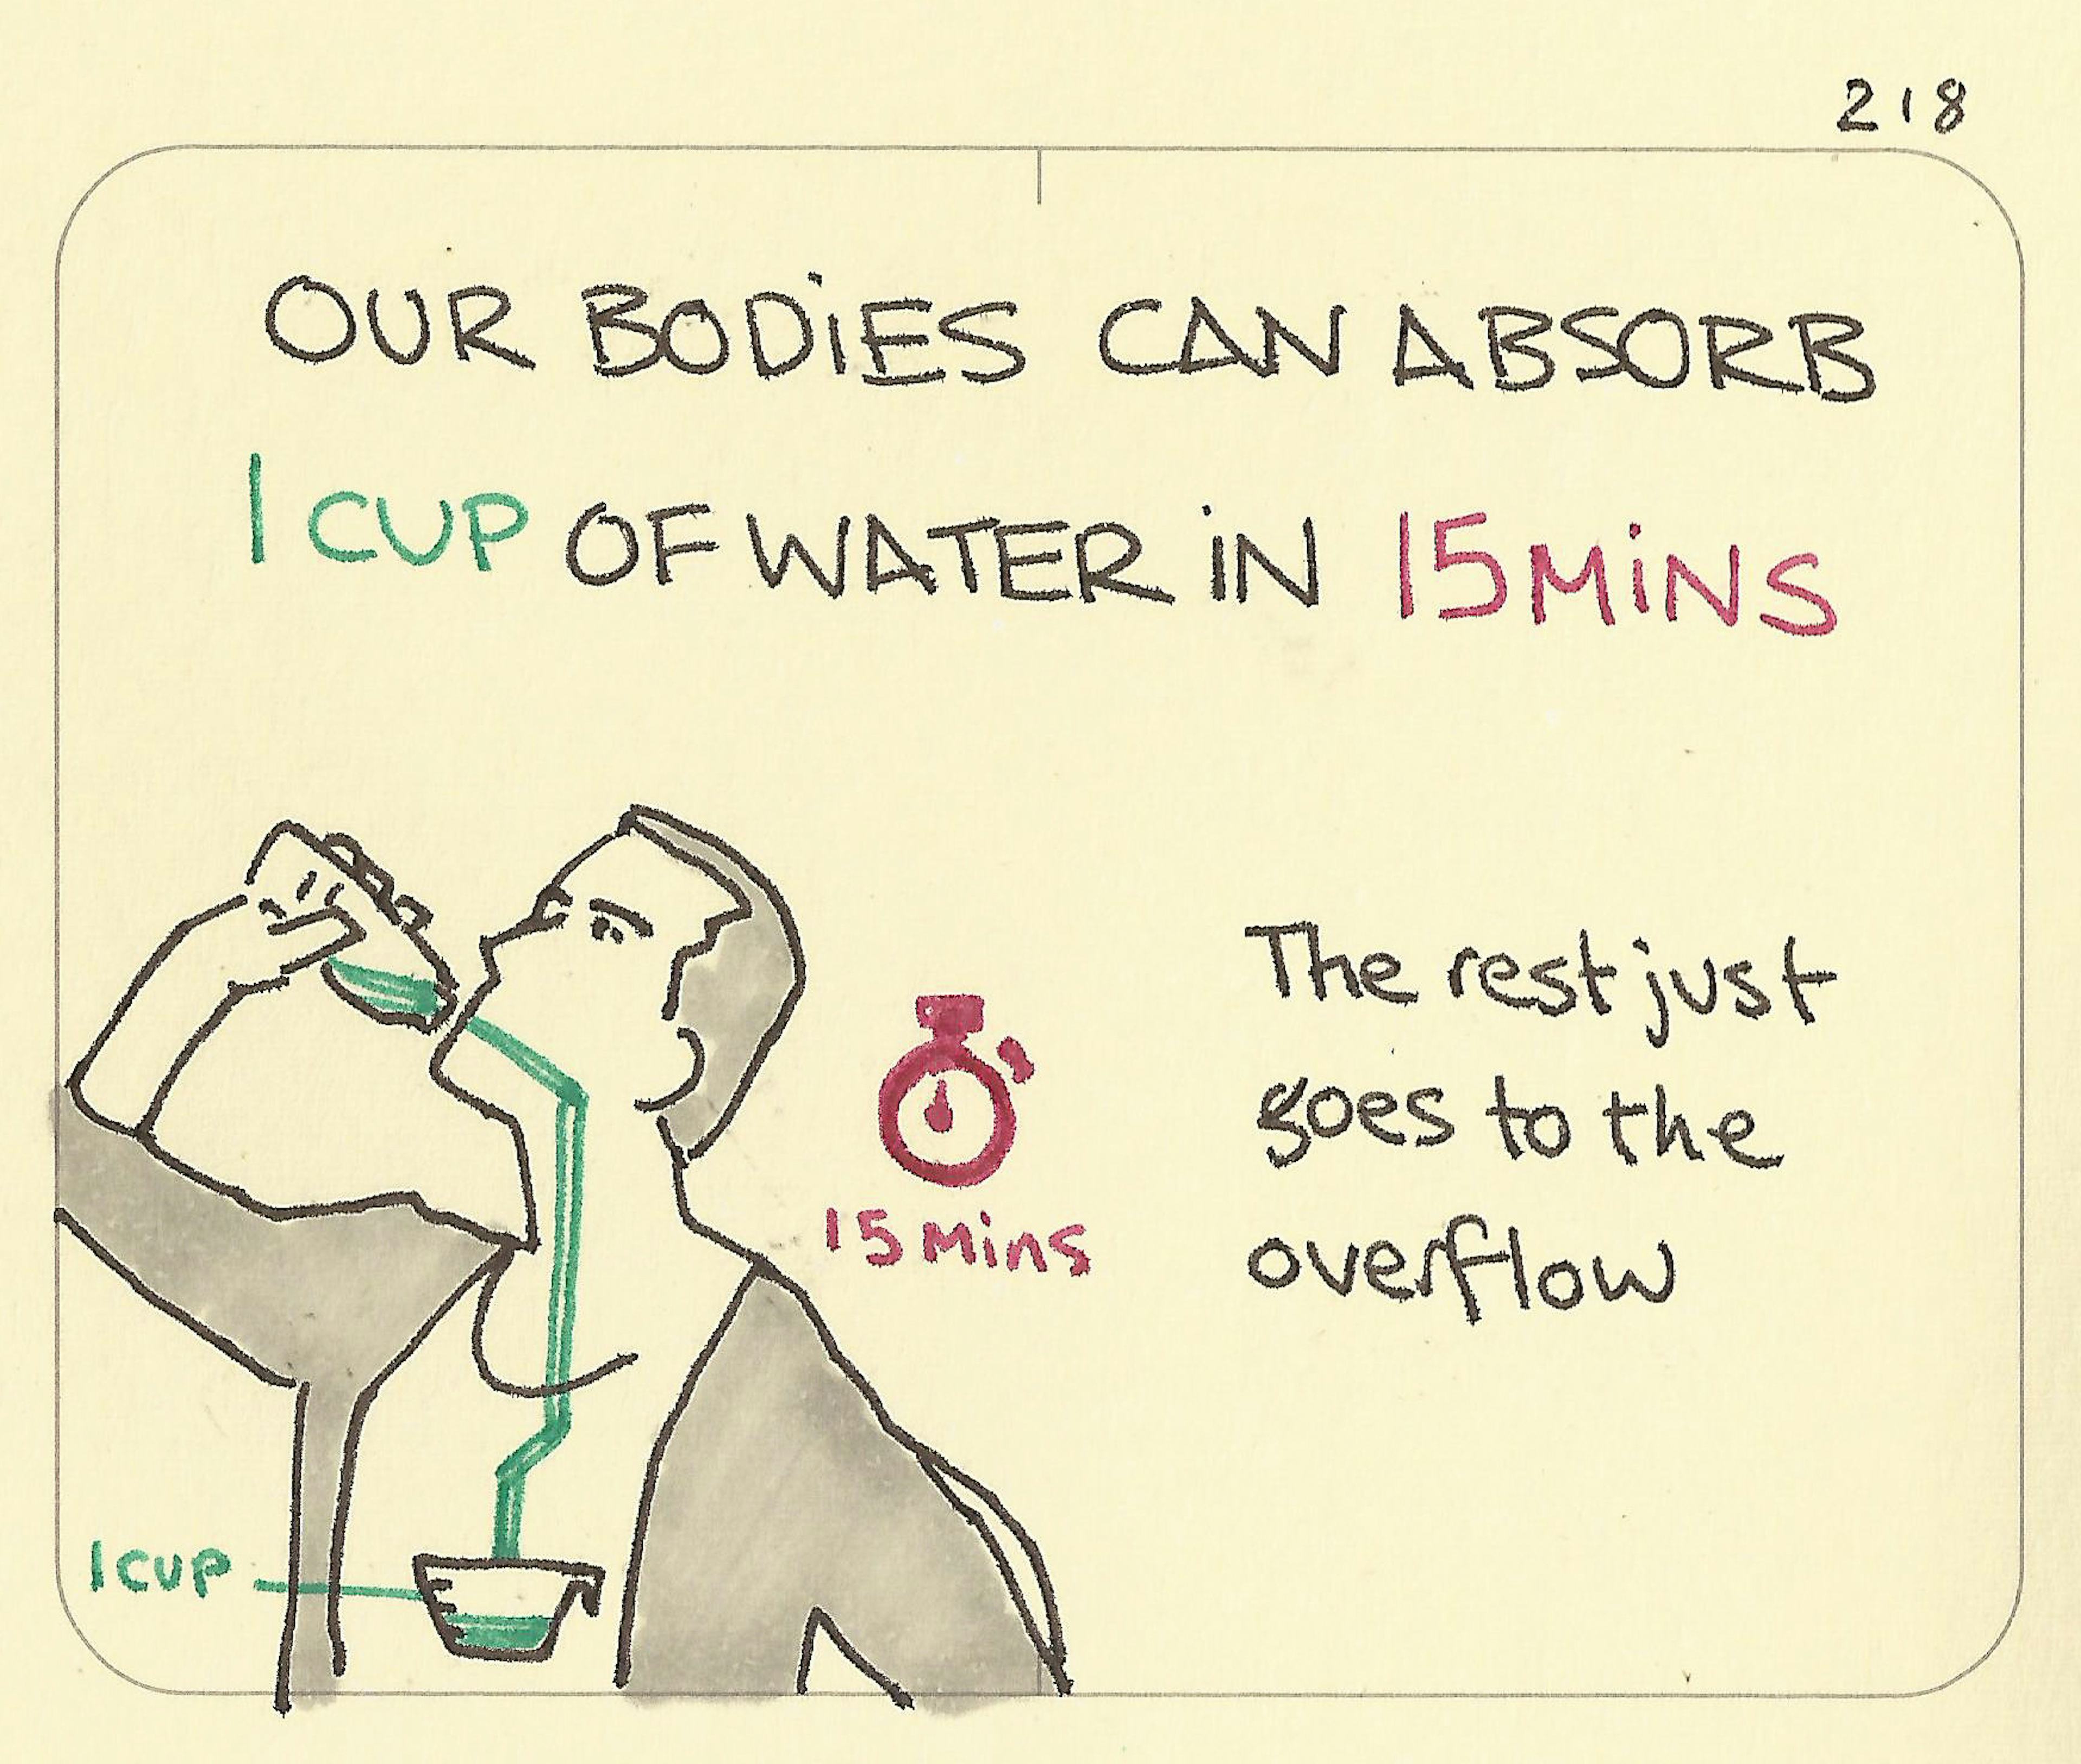 Our bodies can absorb 1 cup of water in 15 mins - Sketchplanations